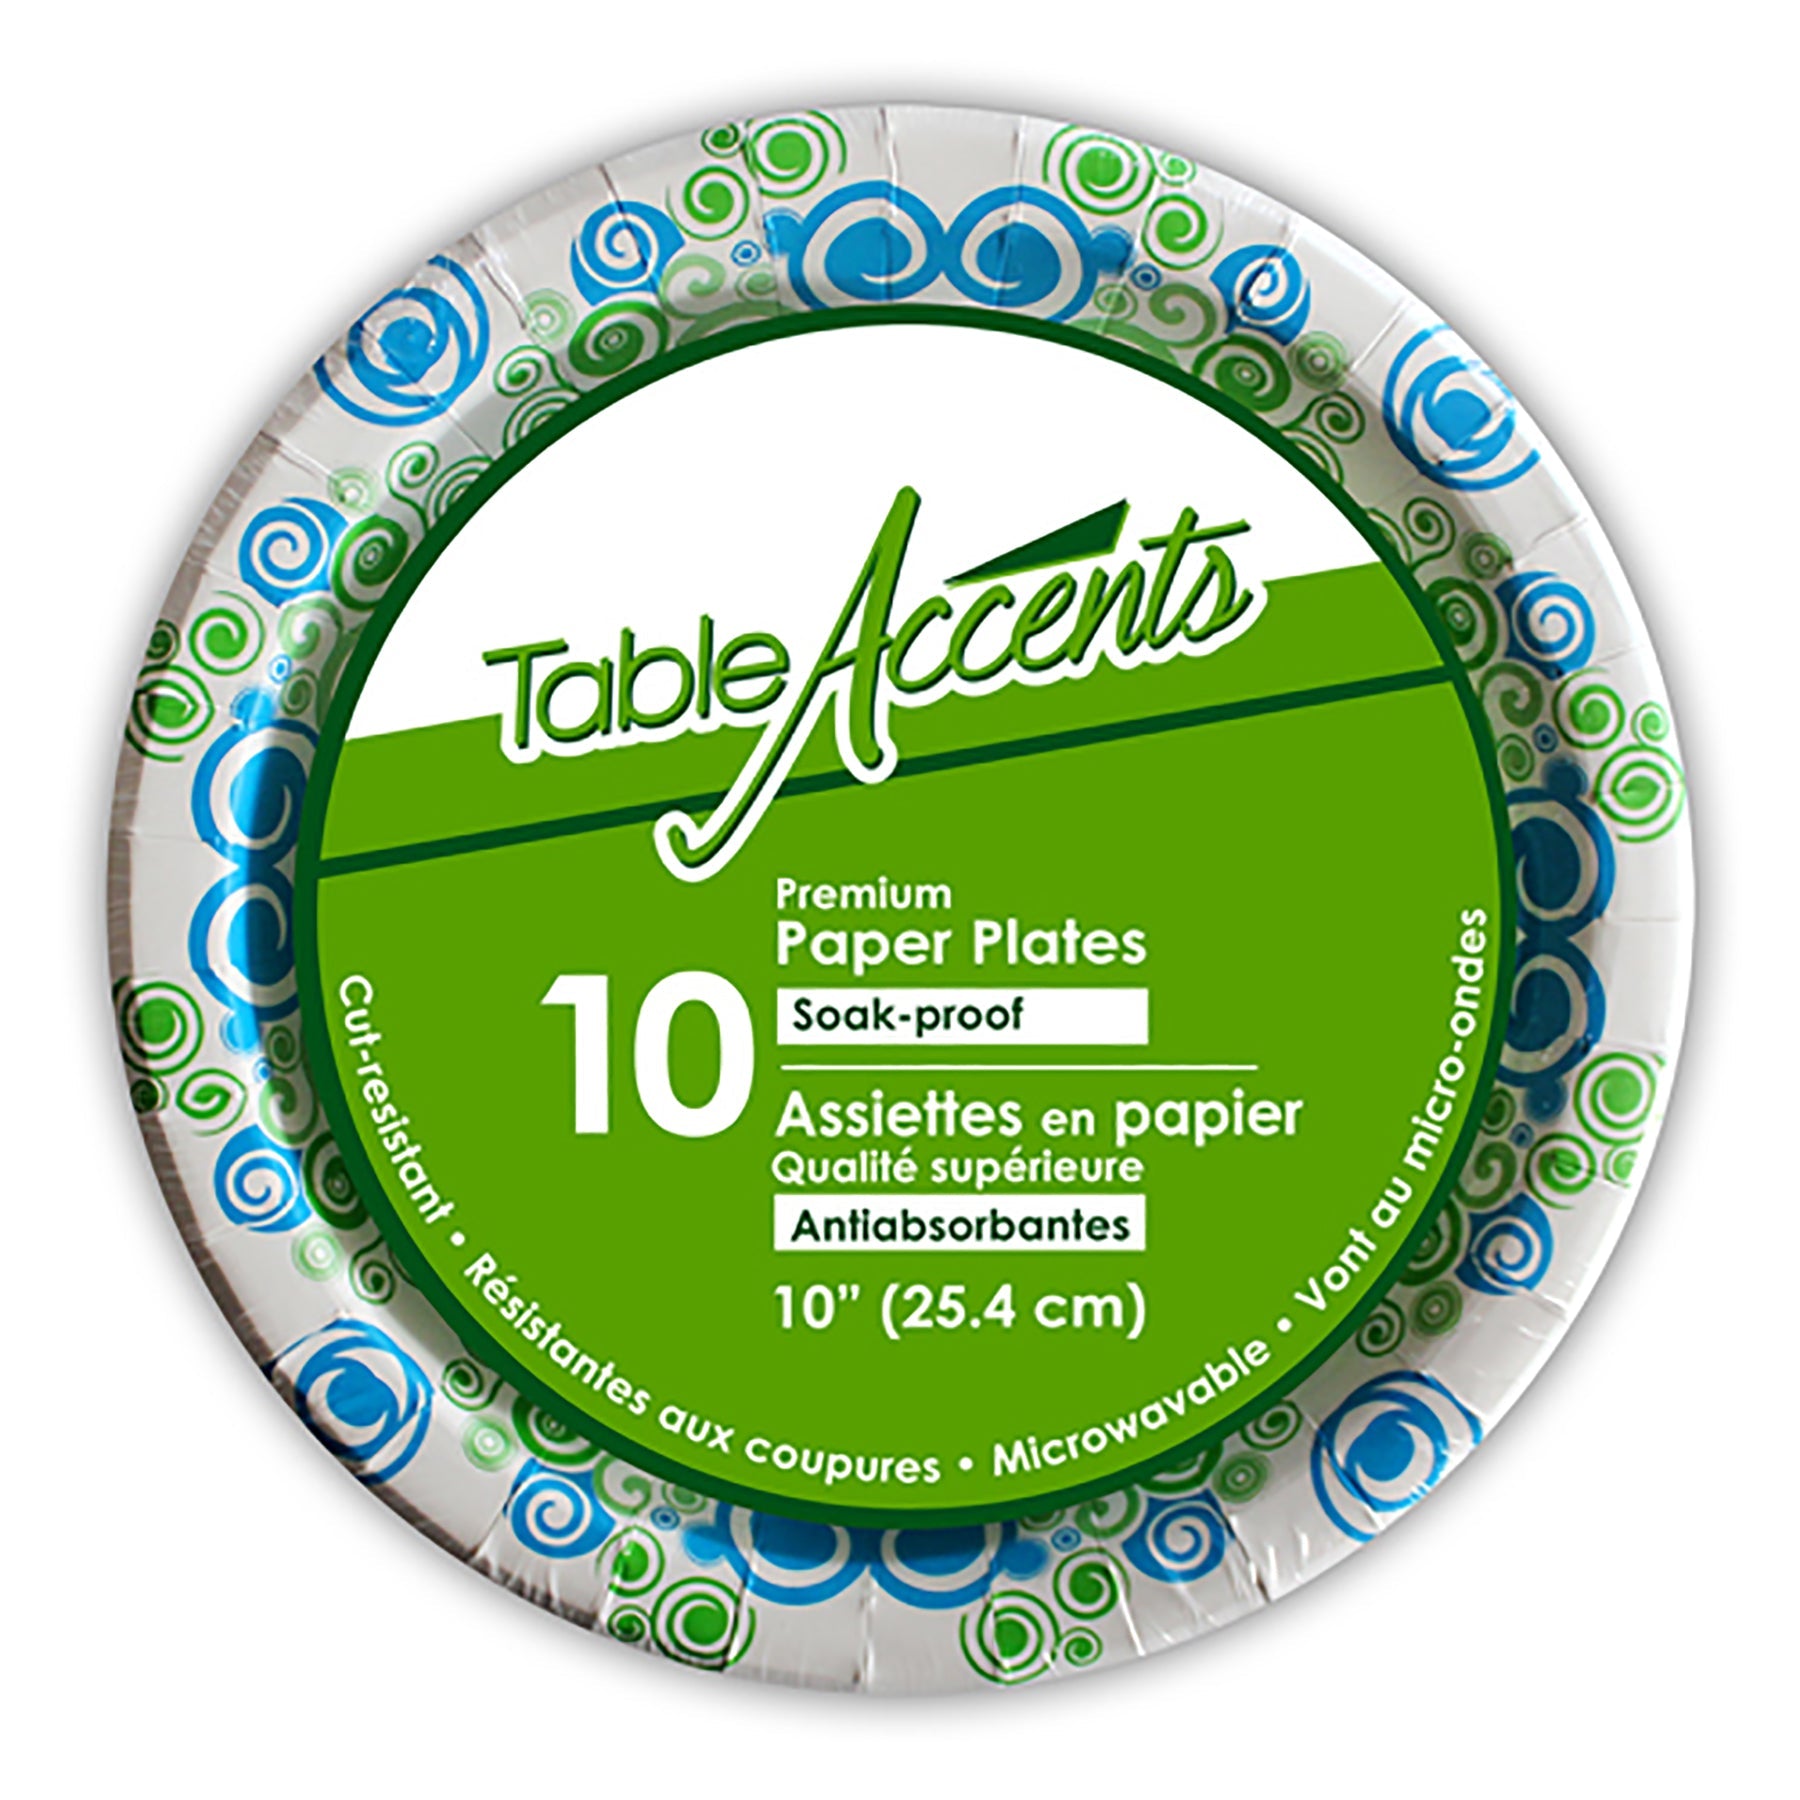 Table Accents 10 Printed Paper Plates 10in